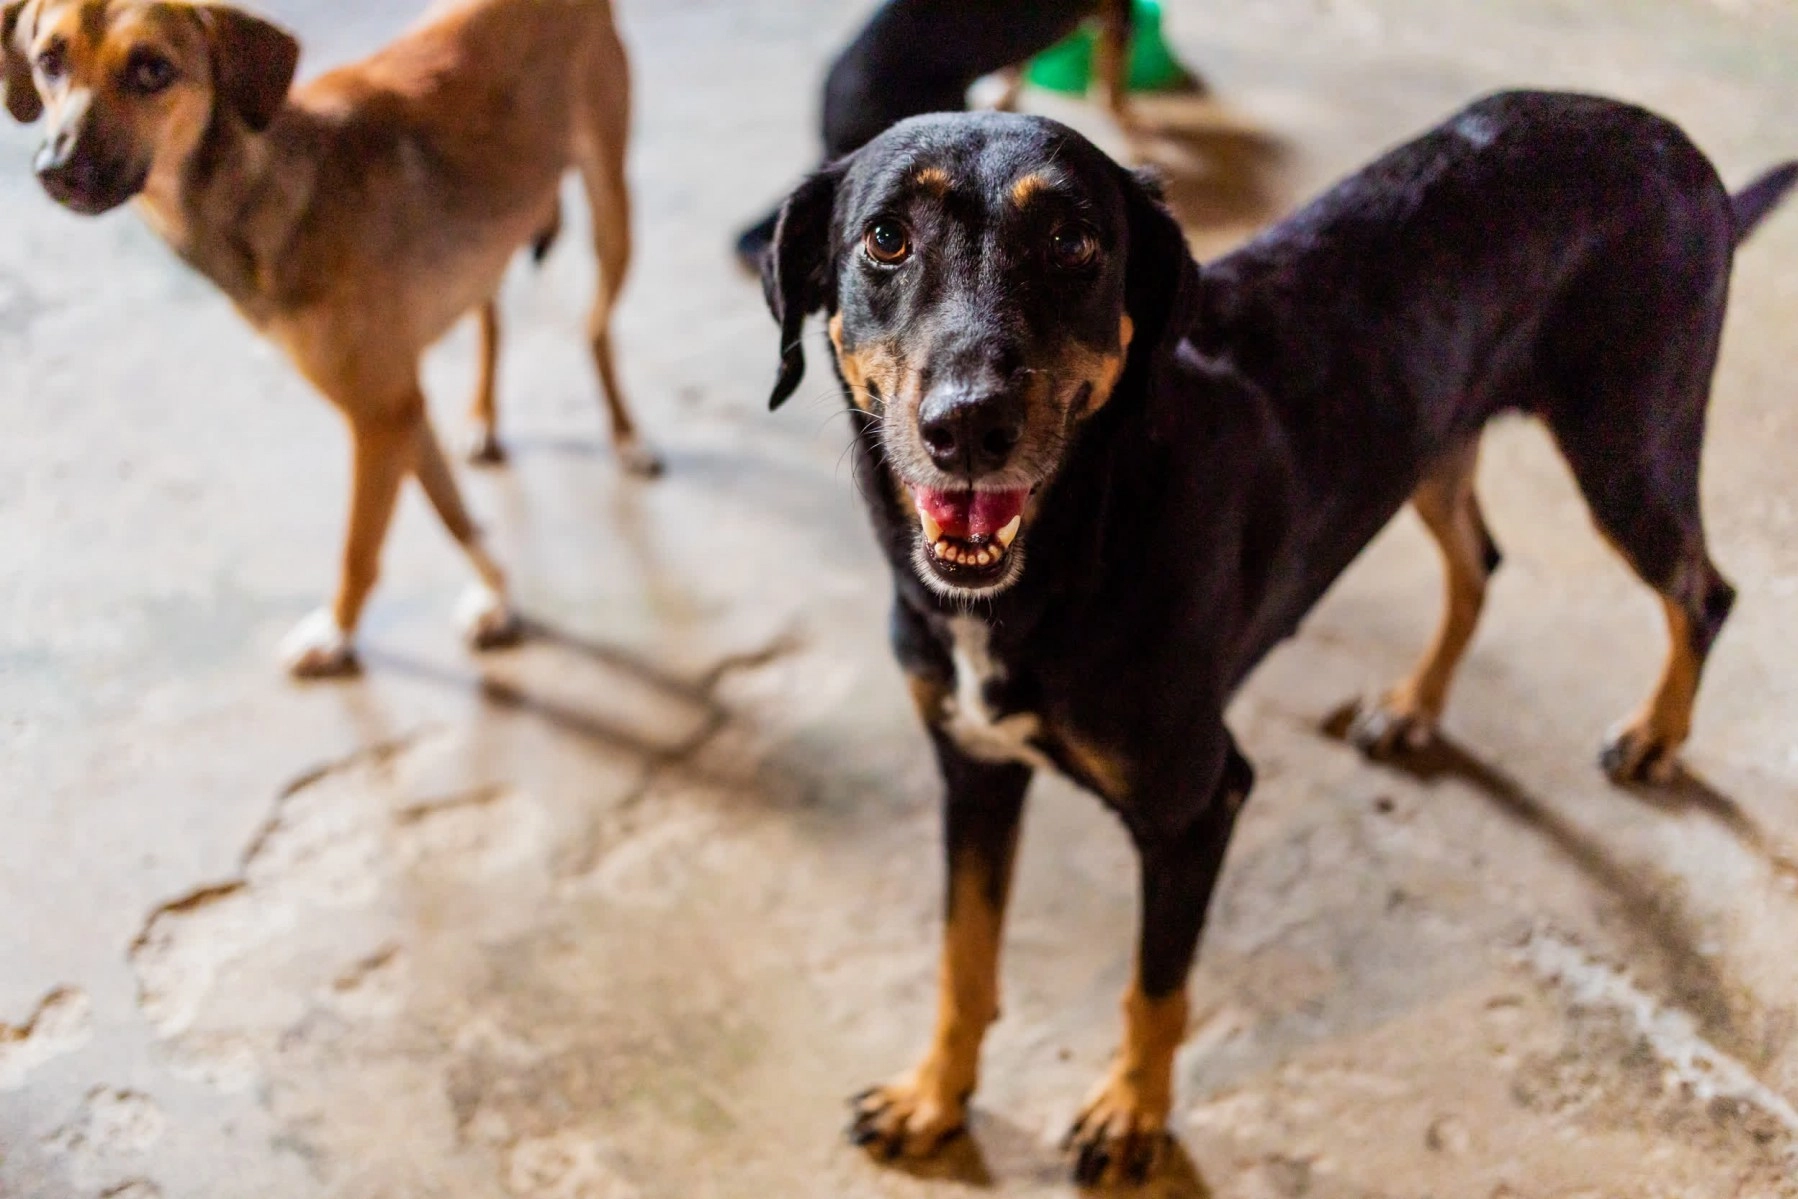 A happy dog in a shelter in Brazil.